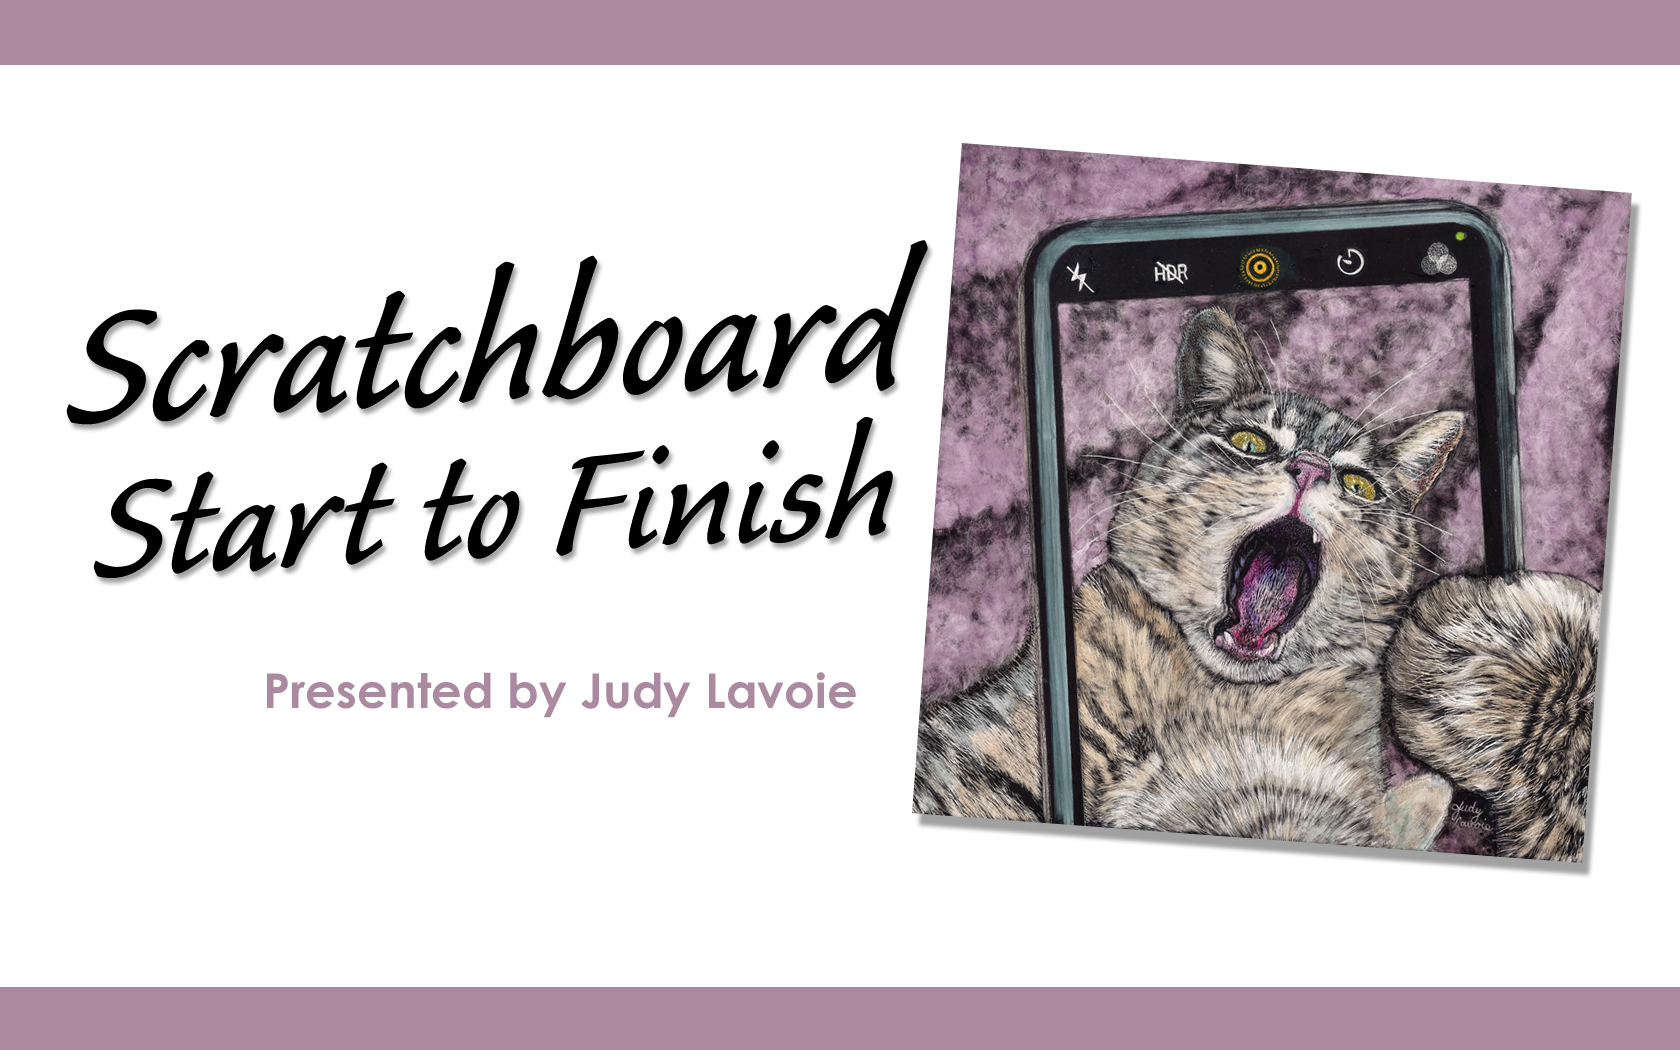 Title Image for "Scratchboard Start to Finish" video © Judy Lavoi 2021